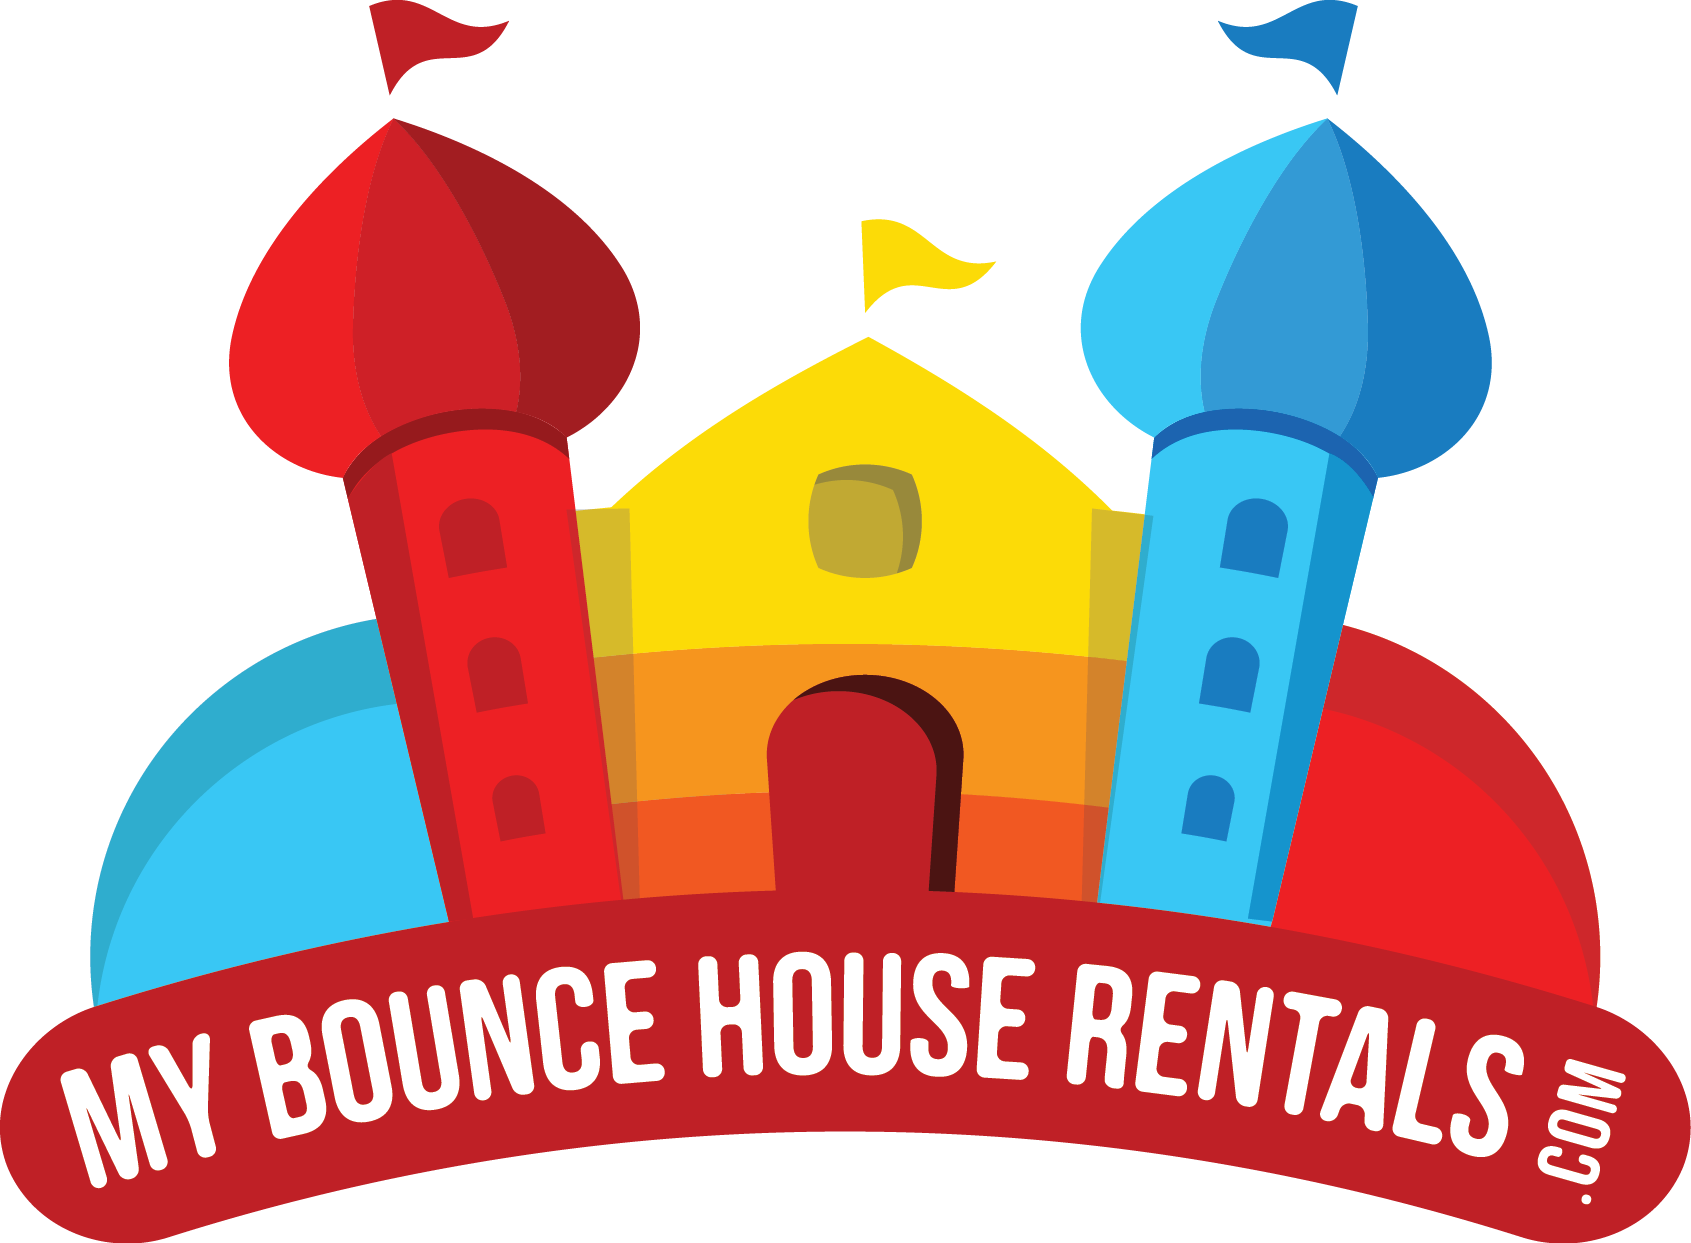 My bounce house rentals of Council Bluffs's Logo